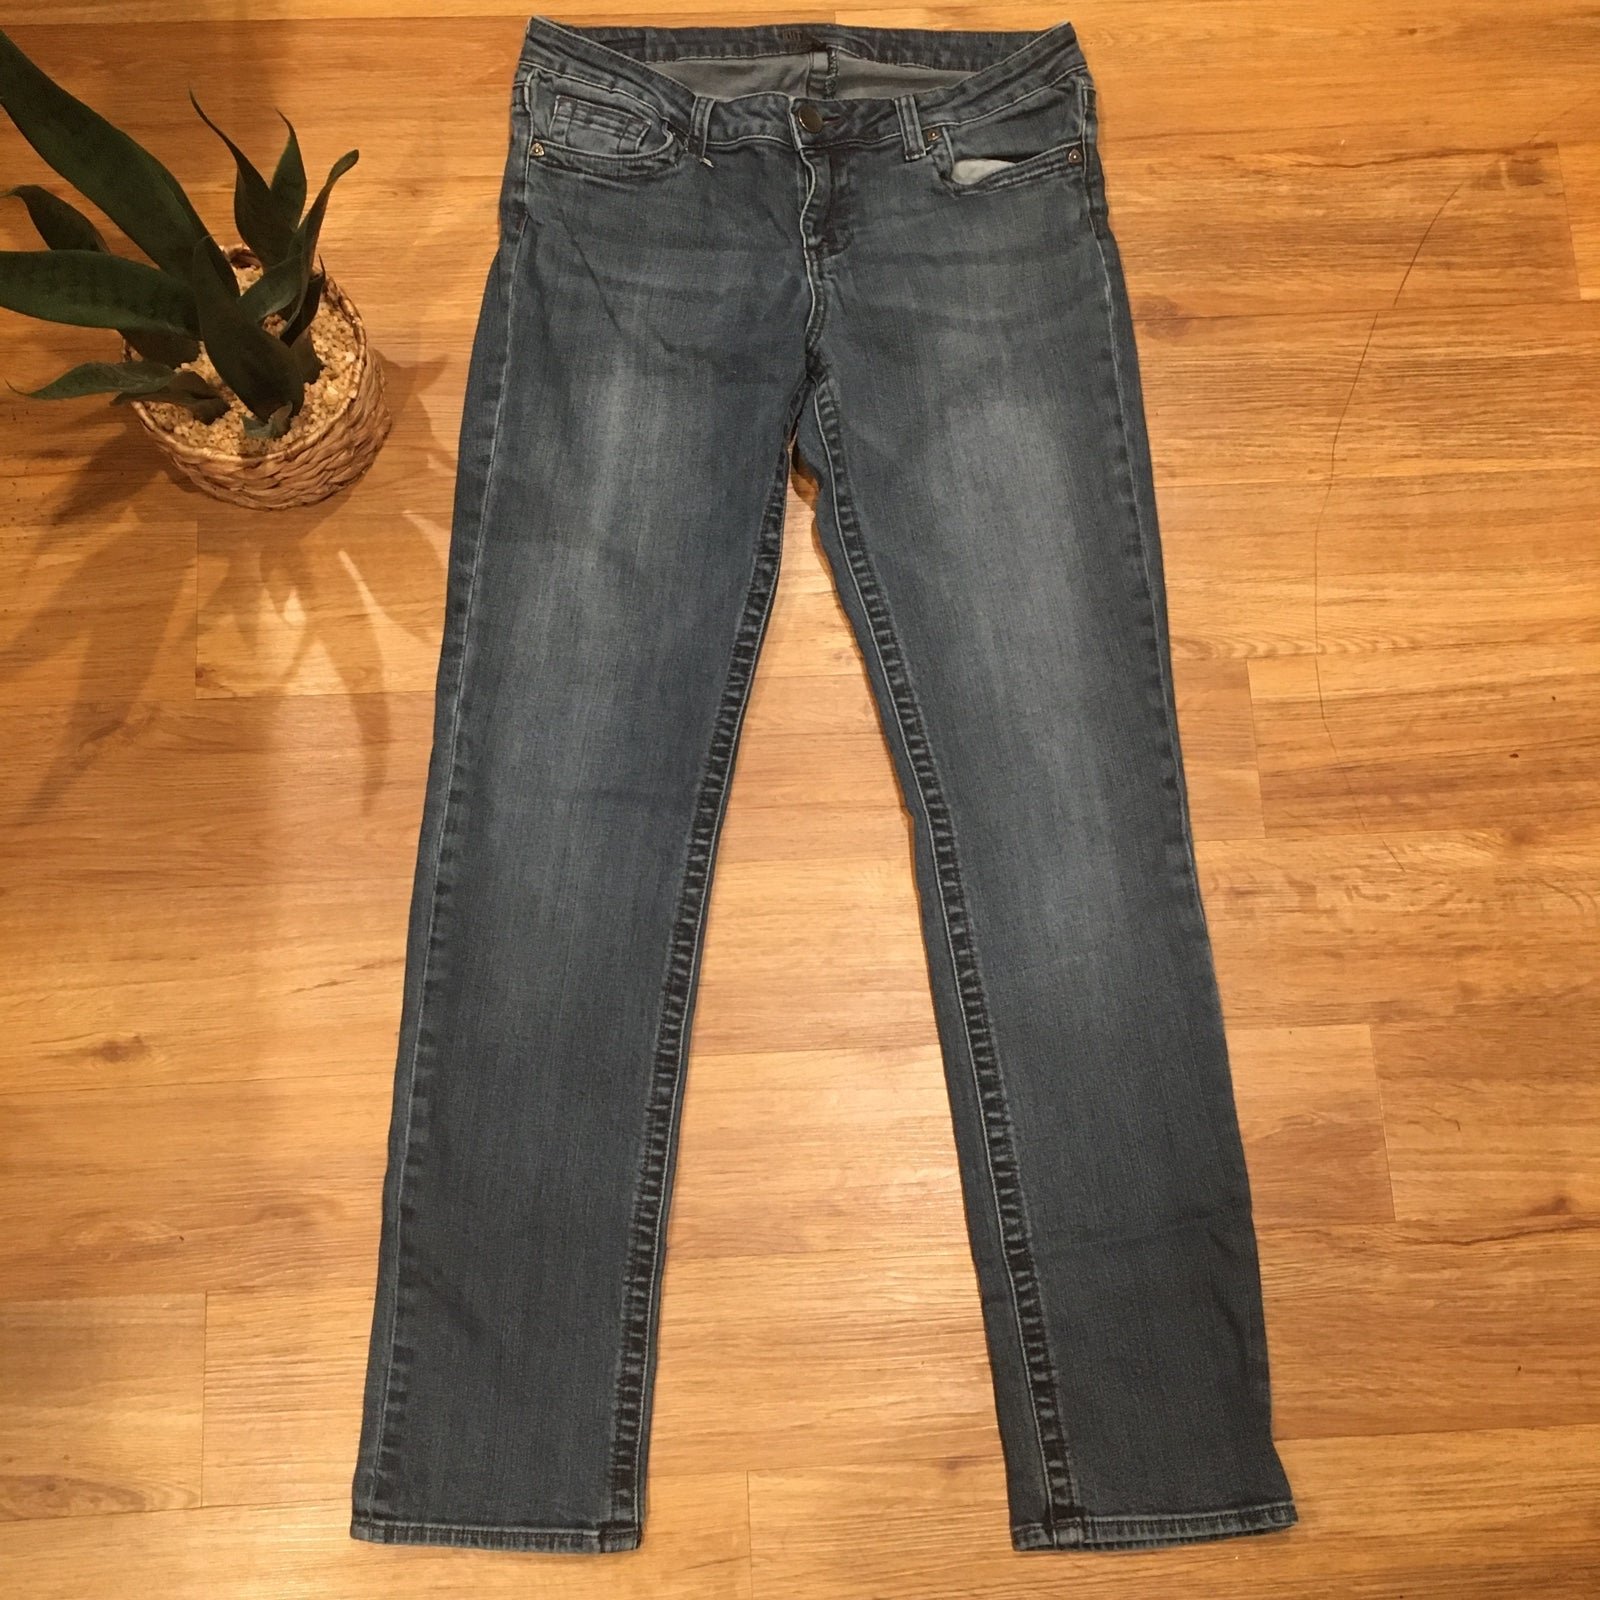 Promotions  Kut From The Kloth Jeans Size 10L KIcn2gDtS